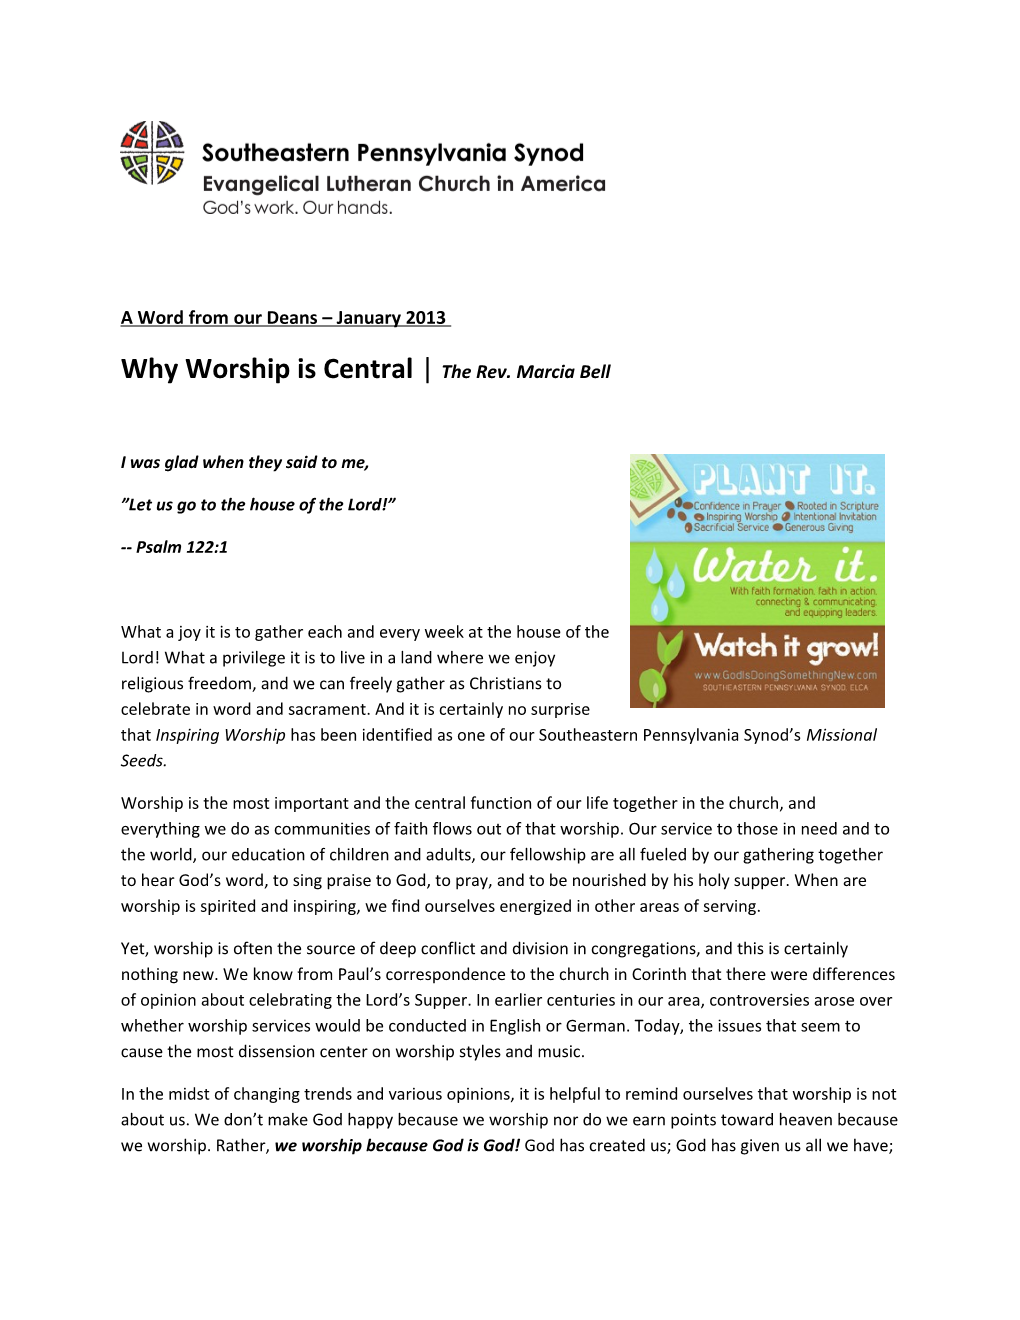 Why Worship Is Central the Rev. Marcia Bell